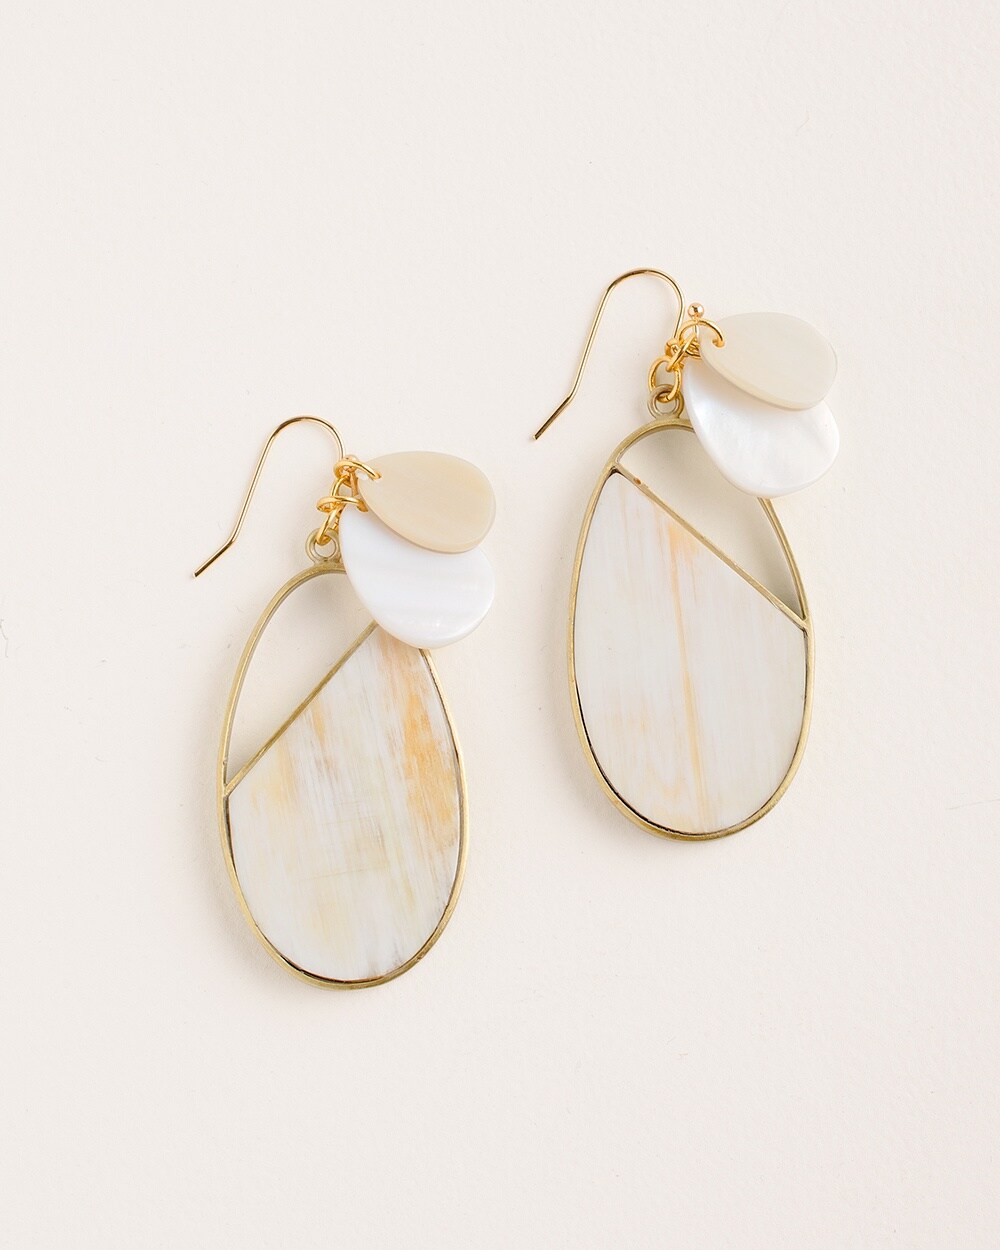 Horn and Mother-of-Pearl Drop Earrings